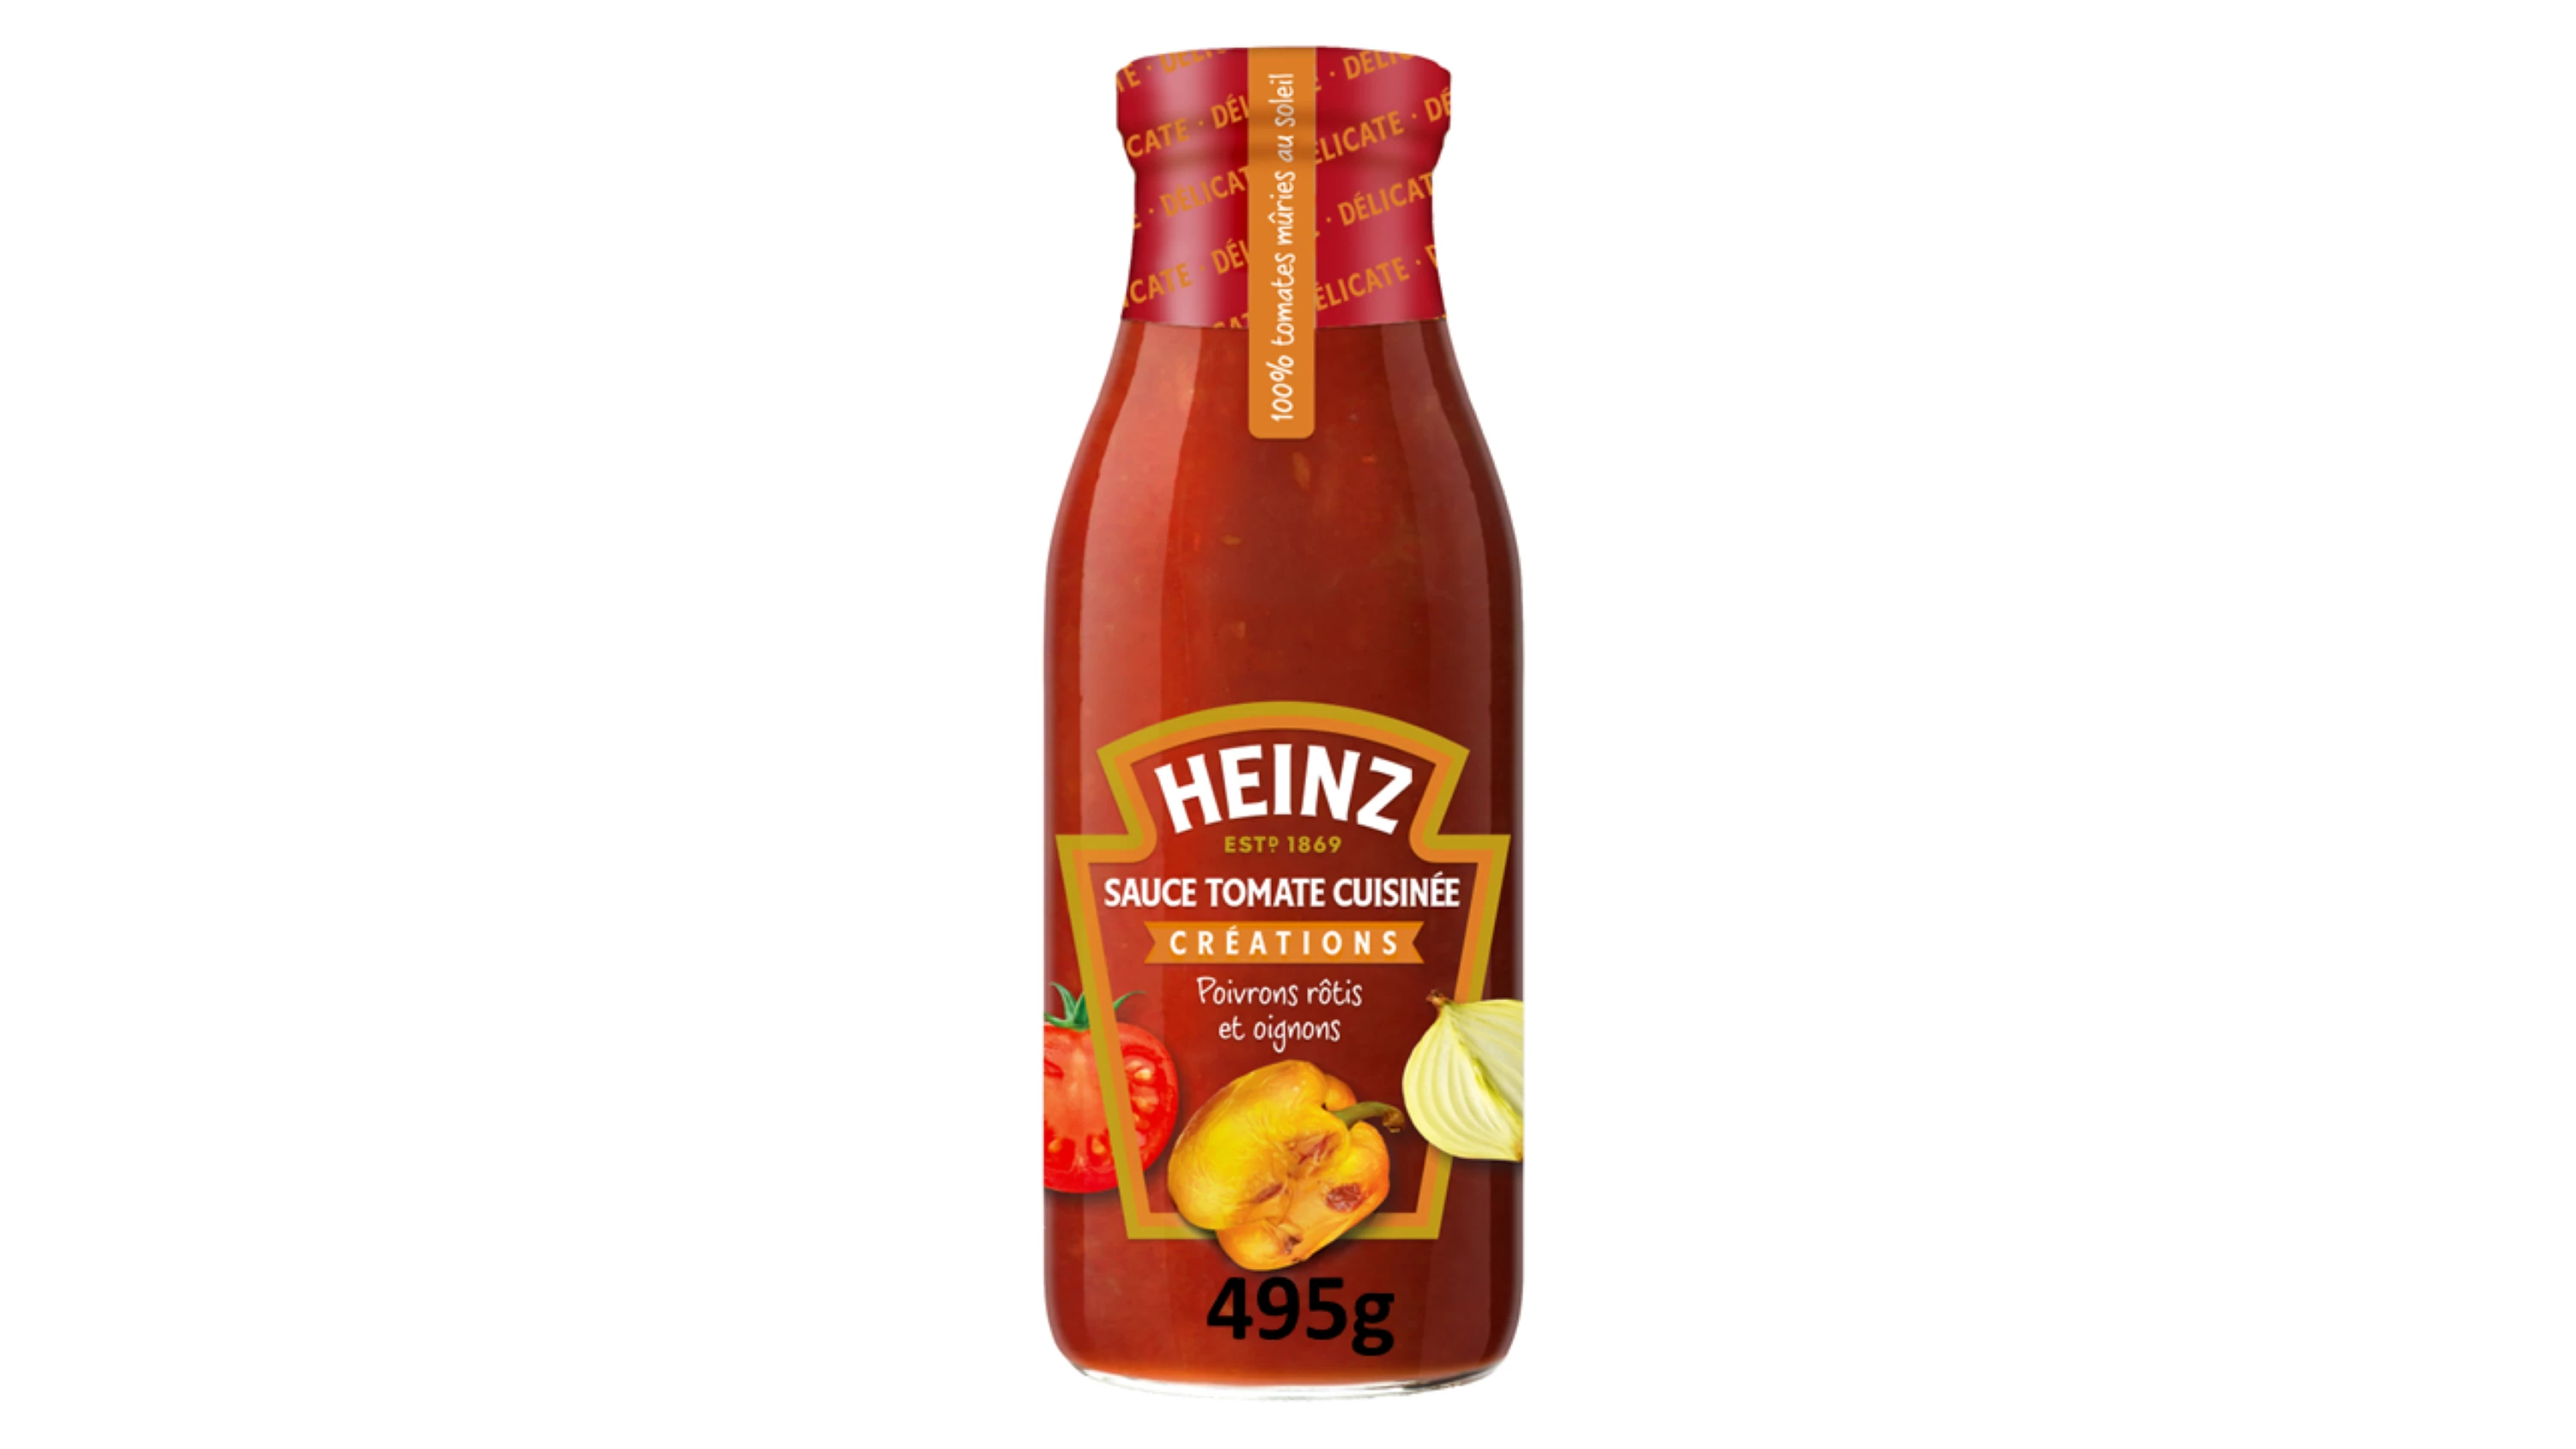 Tomato sauce cooked with roasted peppers and onions; 495g - HEINZ